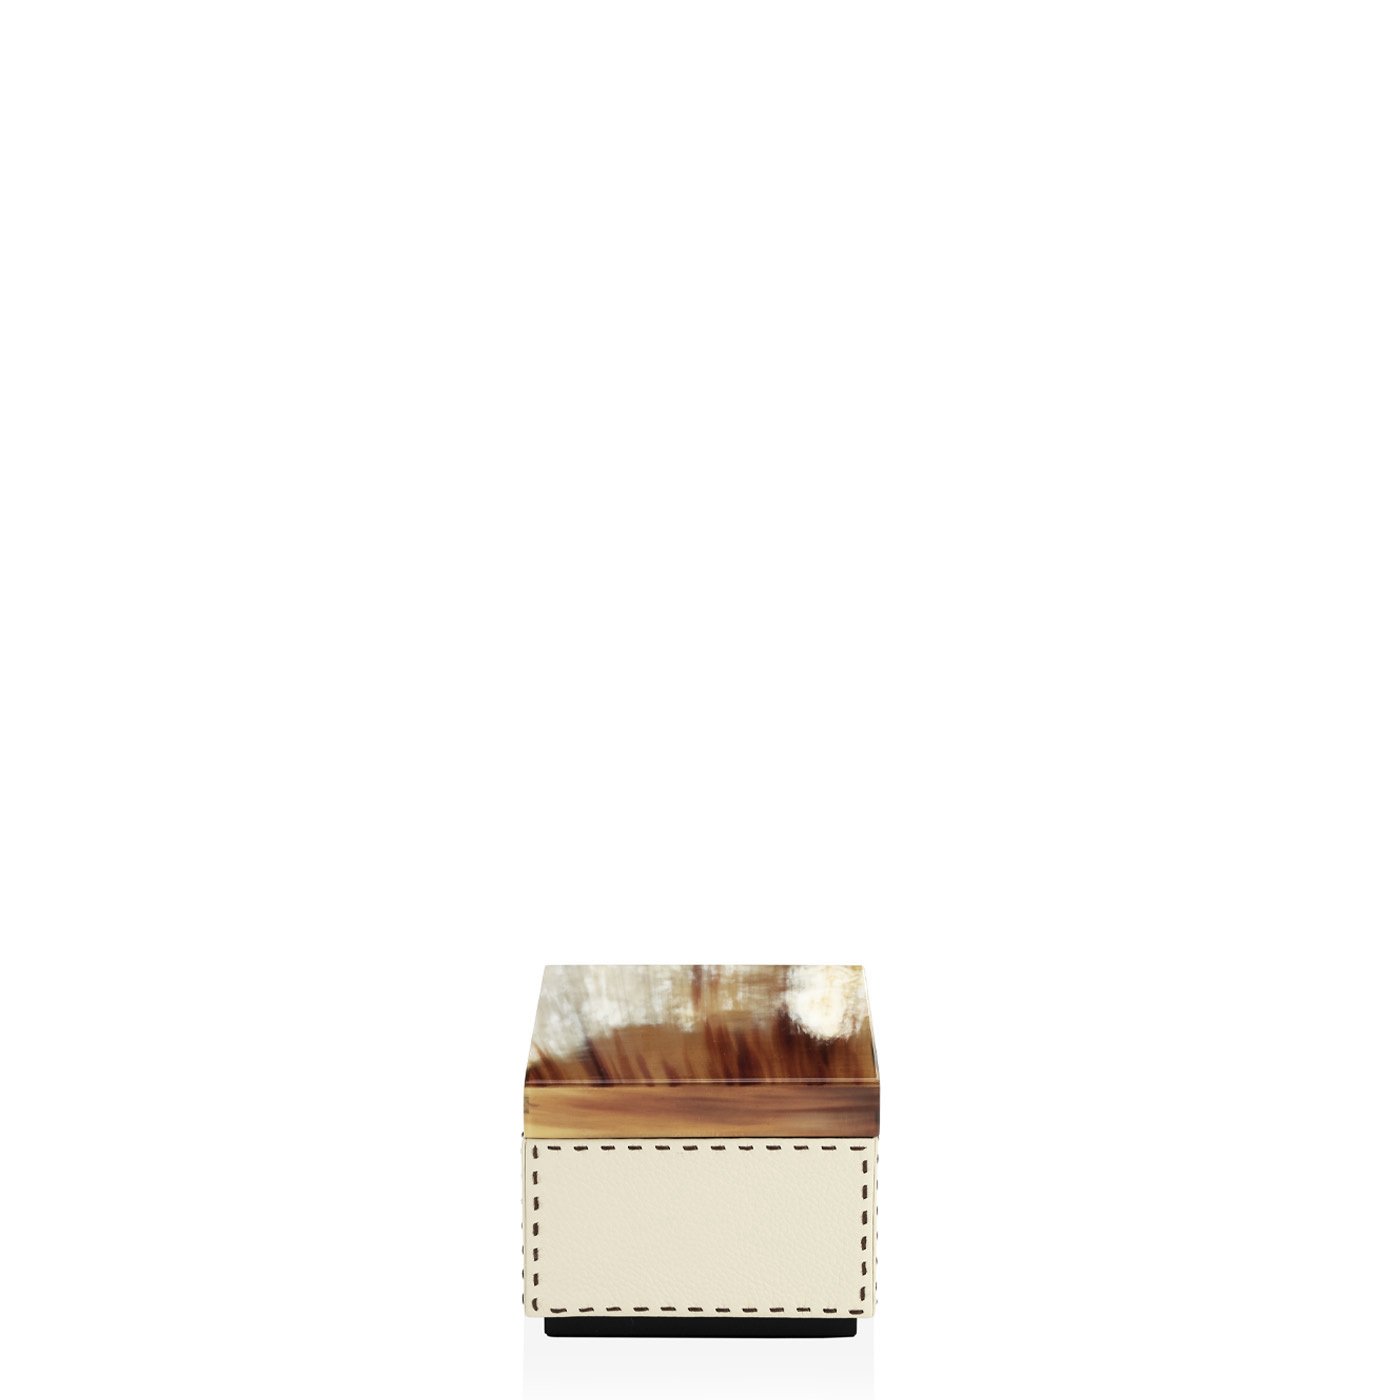 Picture frames and boxes - Ottavia box in horn and Ice-cream colour leather mod. 4466 - Arcahorn